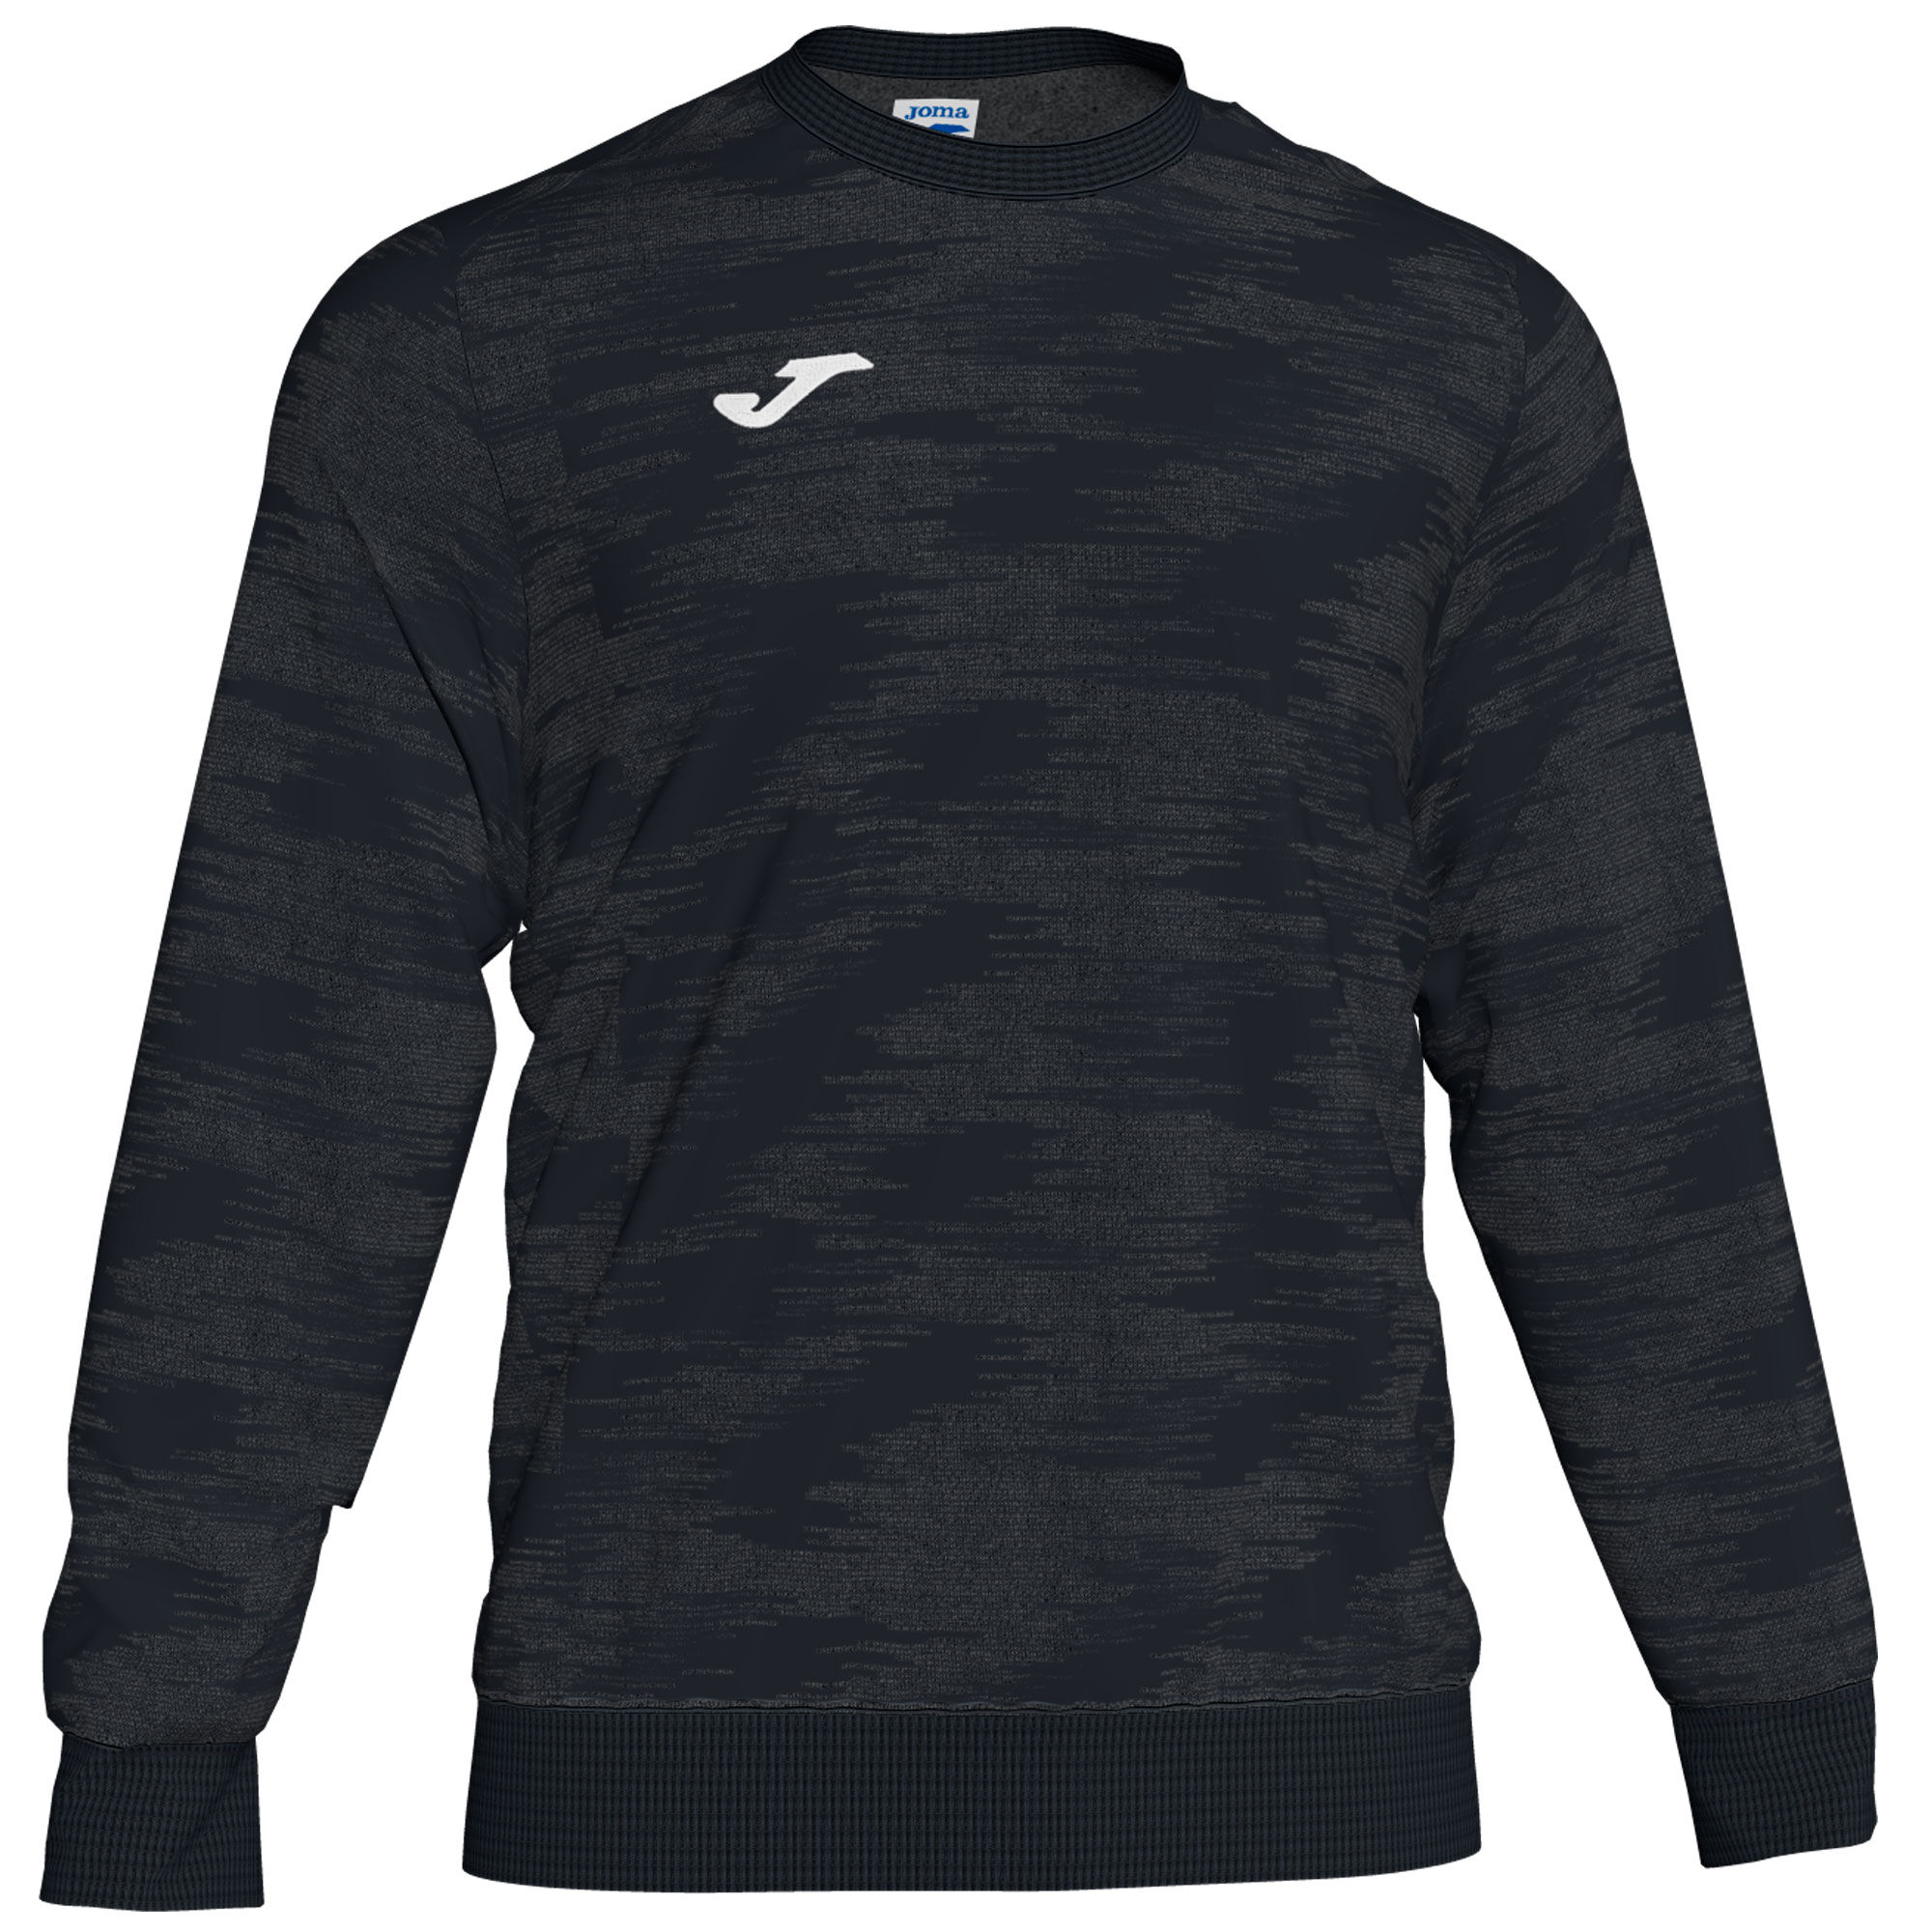 SWEAT-SHIRT HOMME GRAFITY ANTHRACITE